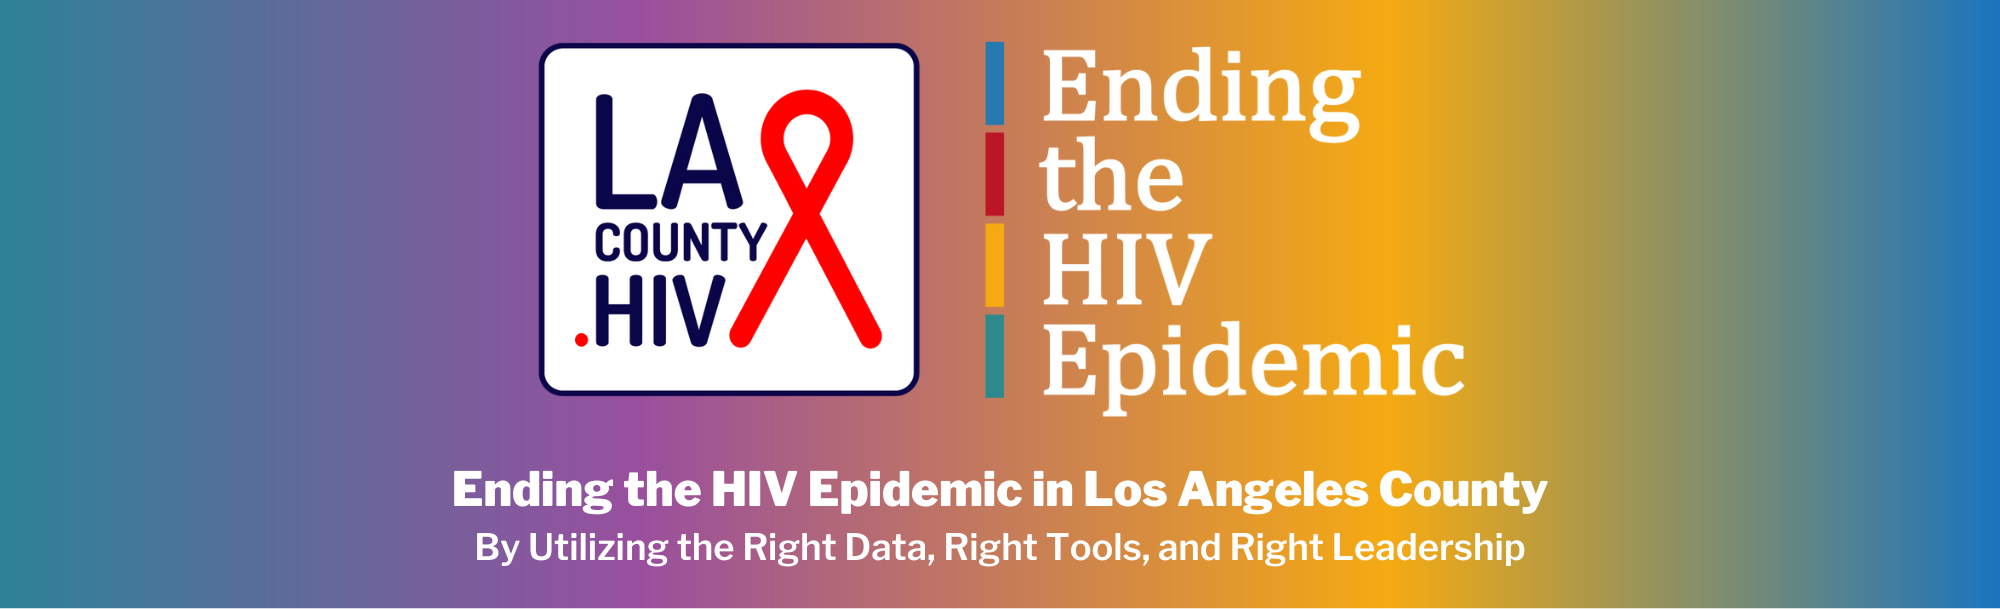 Ending the HIV Epidemic in LA County